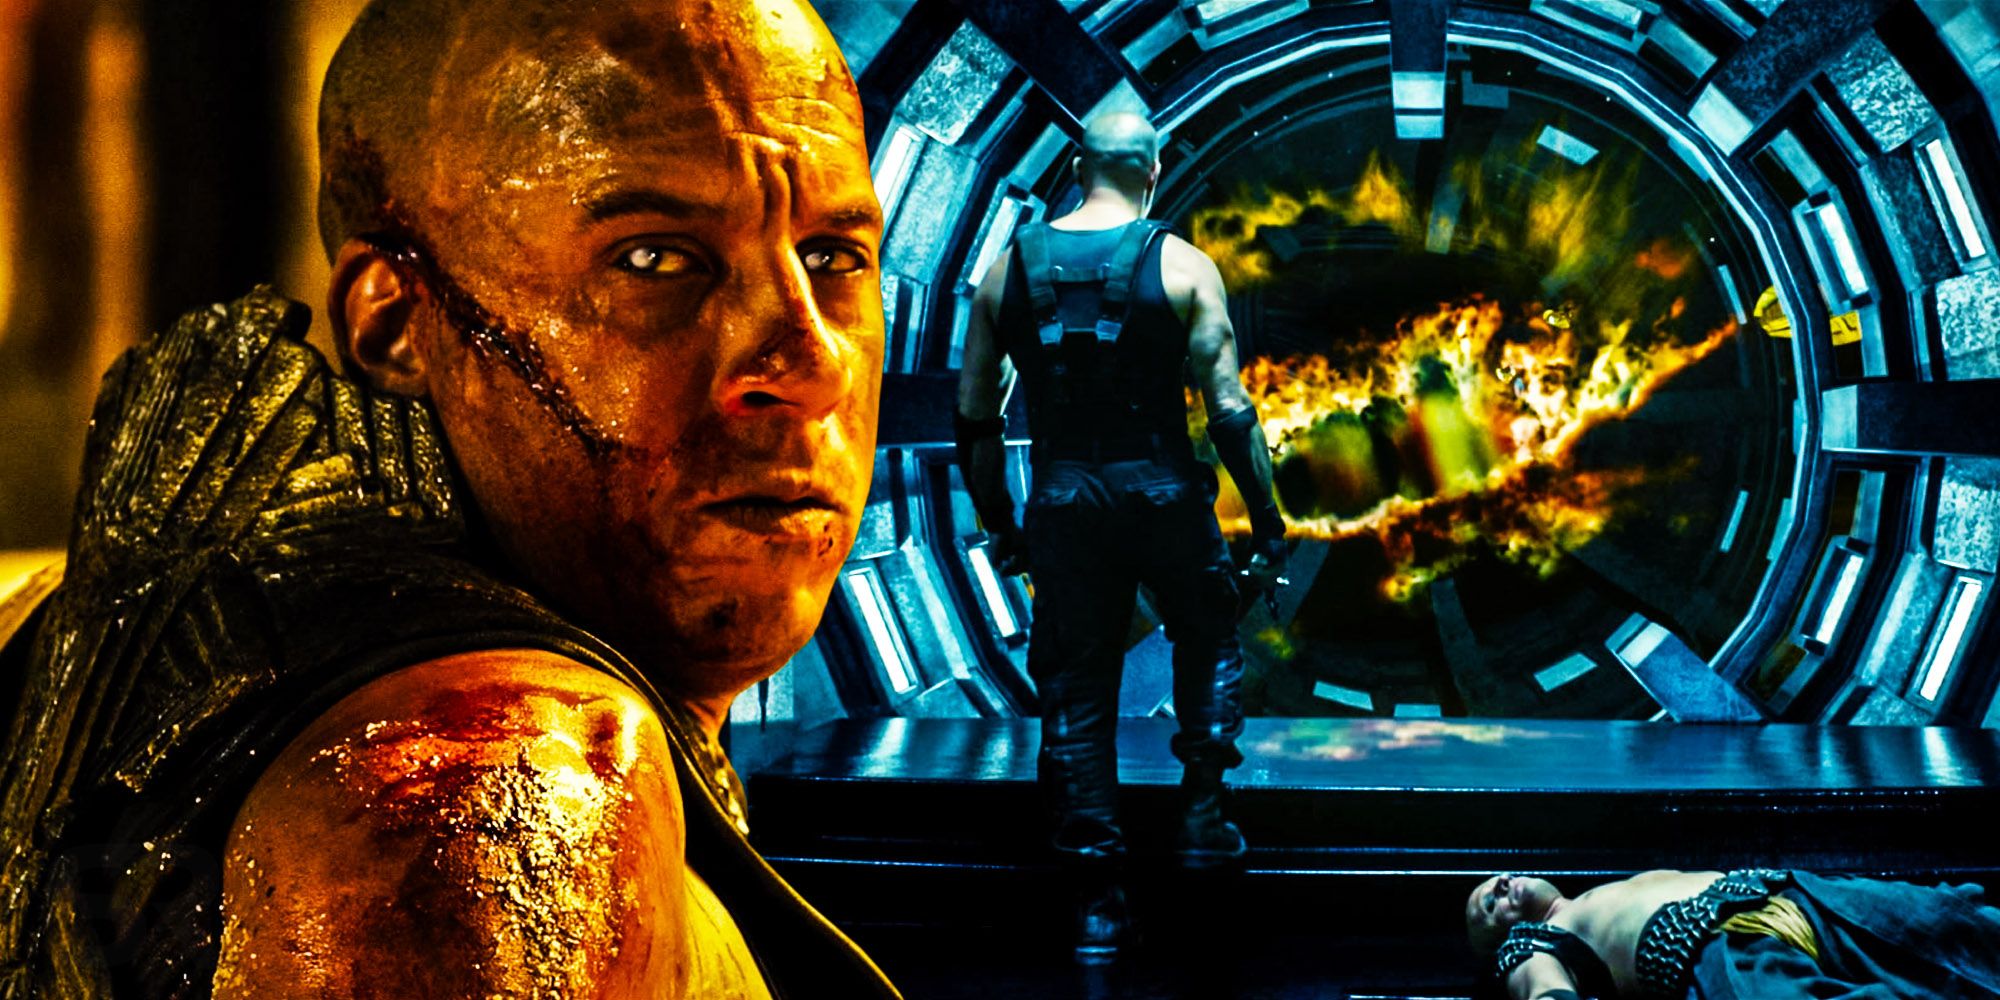 Riddick 4 Will End The Vin Diesel Franchise - Theory Explained